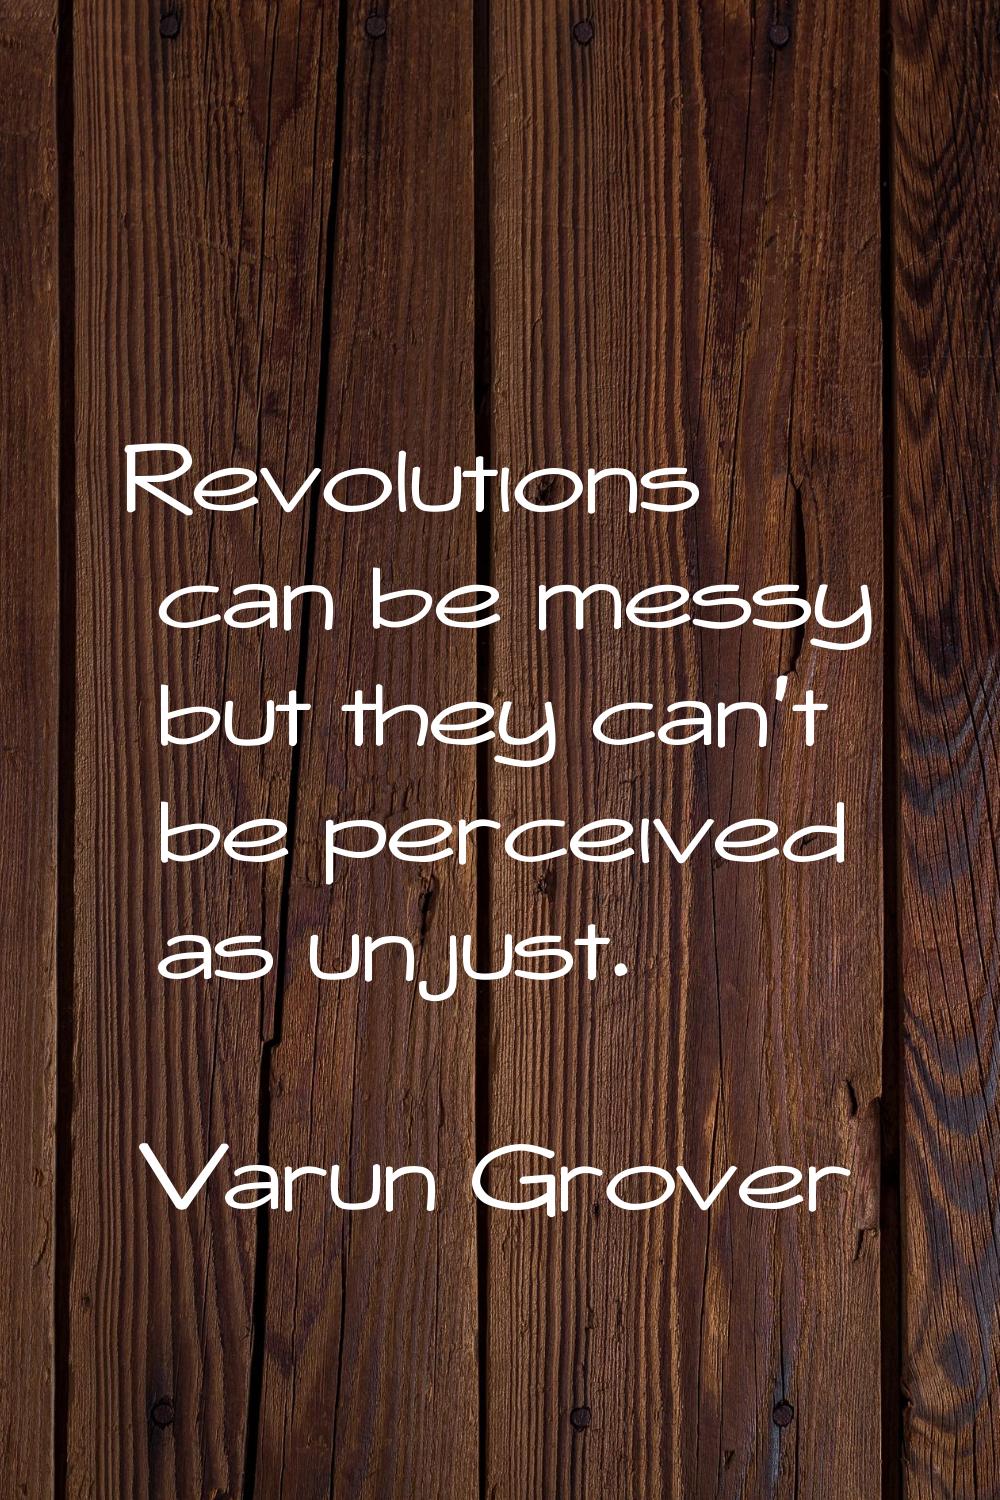 Revolutions can be messy but they can't be perceived as unjust.